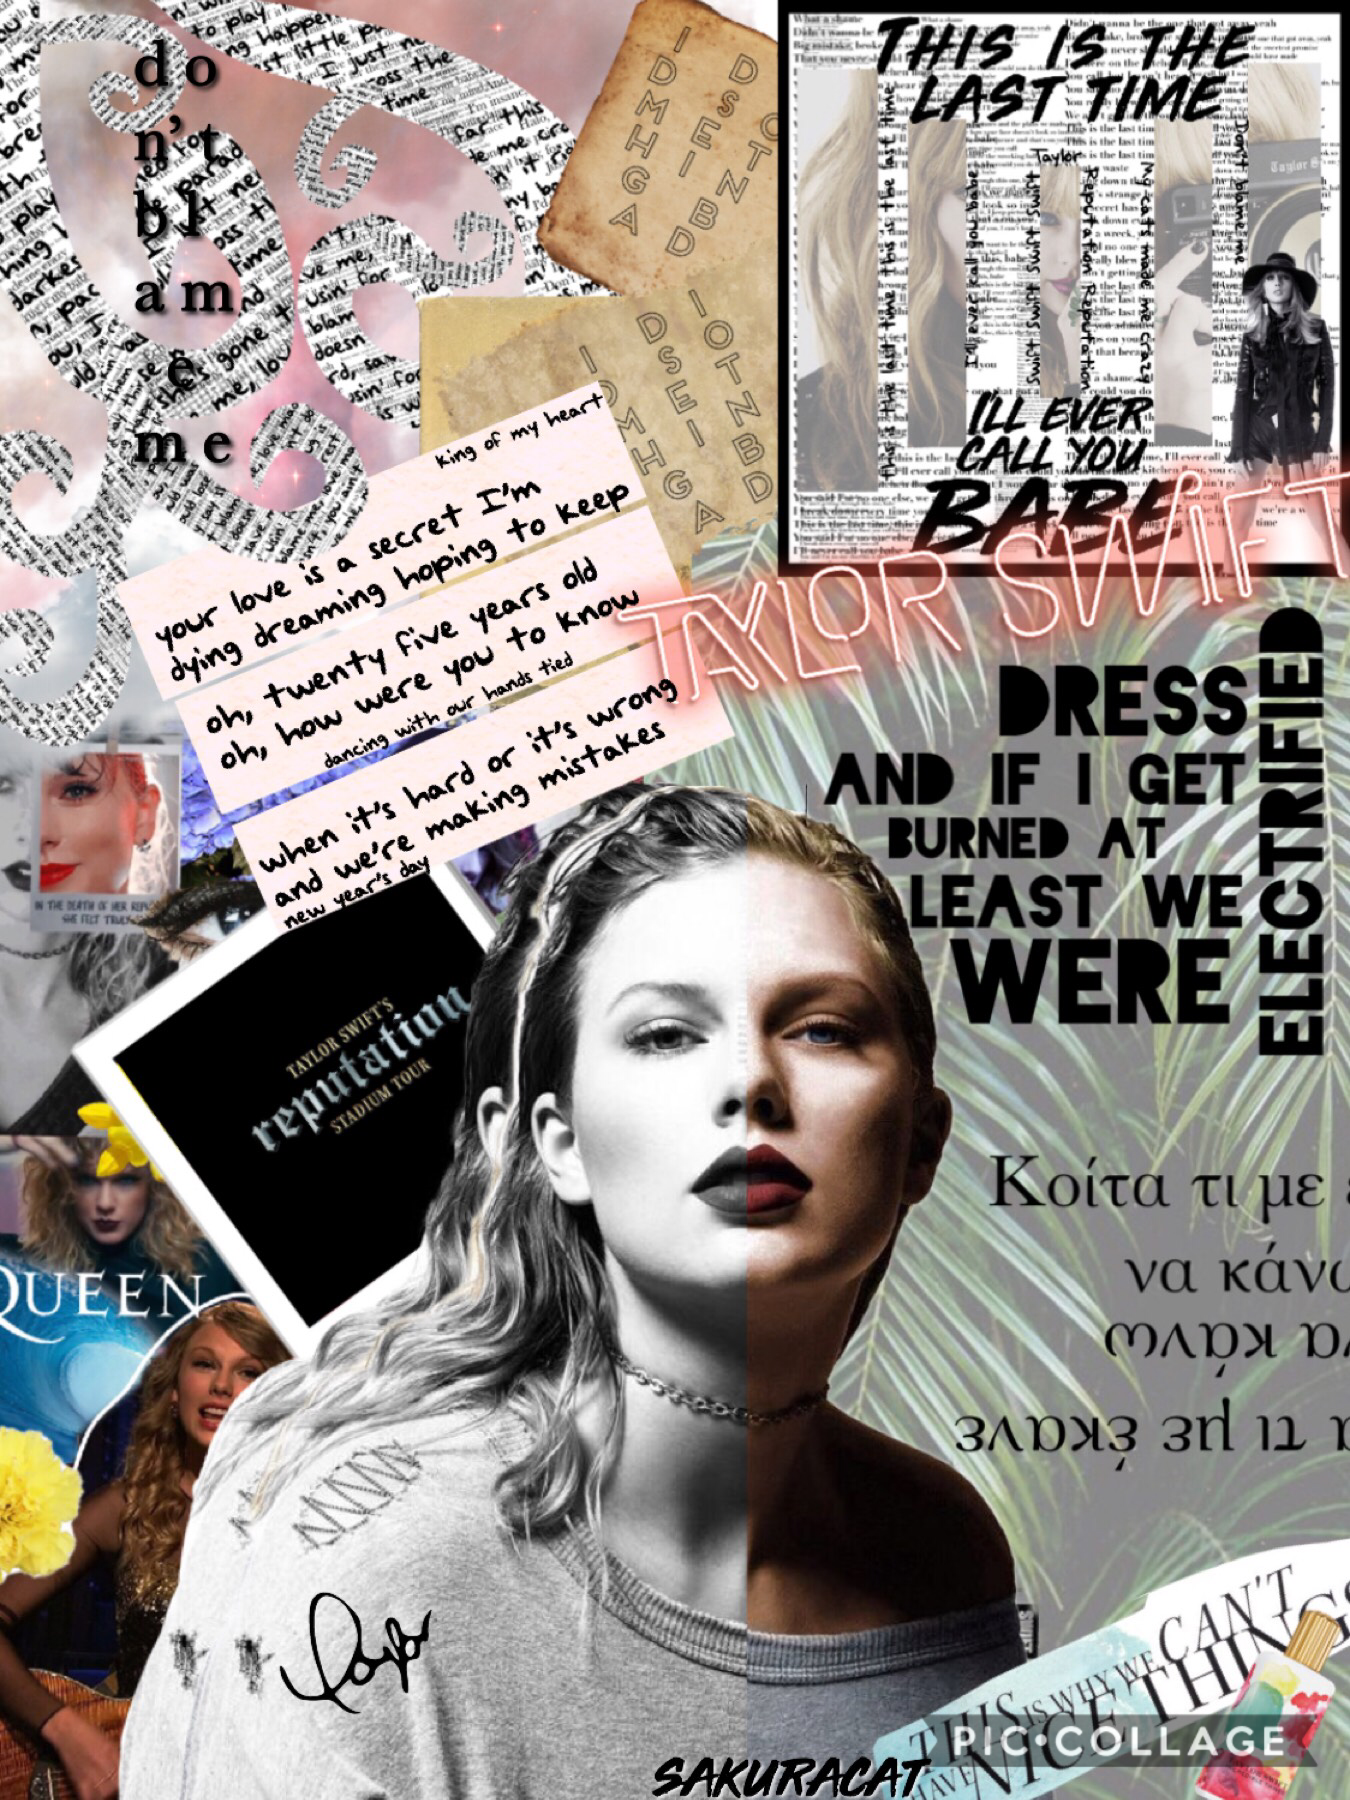 Tap =^._.^=

Idk if this will be my last Taylor-themed collage. Please read my previous post—> QOTD: Have you ever listened to Monologue Song by Taylor Swift? It’s hilarious lol. This is really messy😪 rate 1-10! I’m not feeling very inspired lately so idk